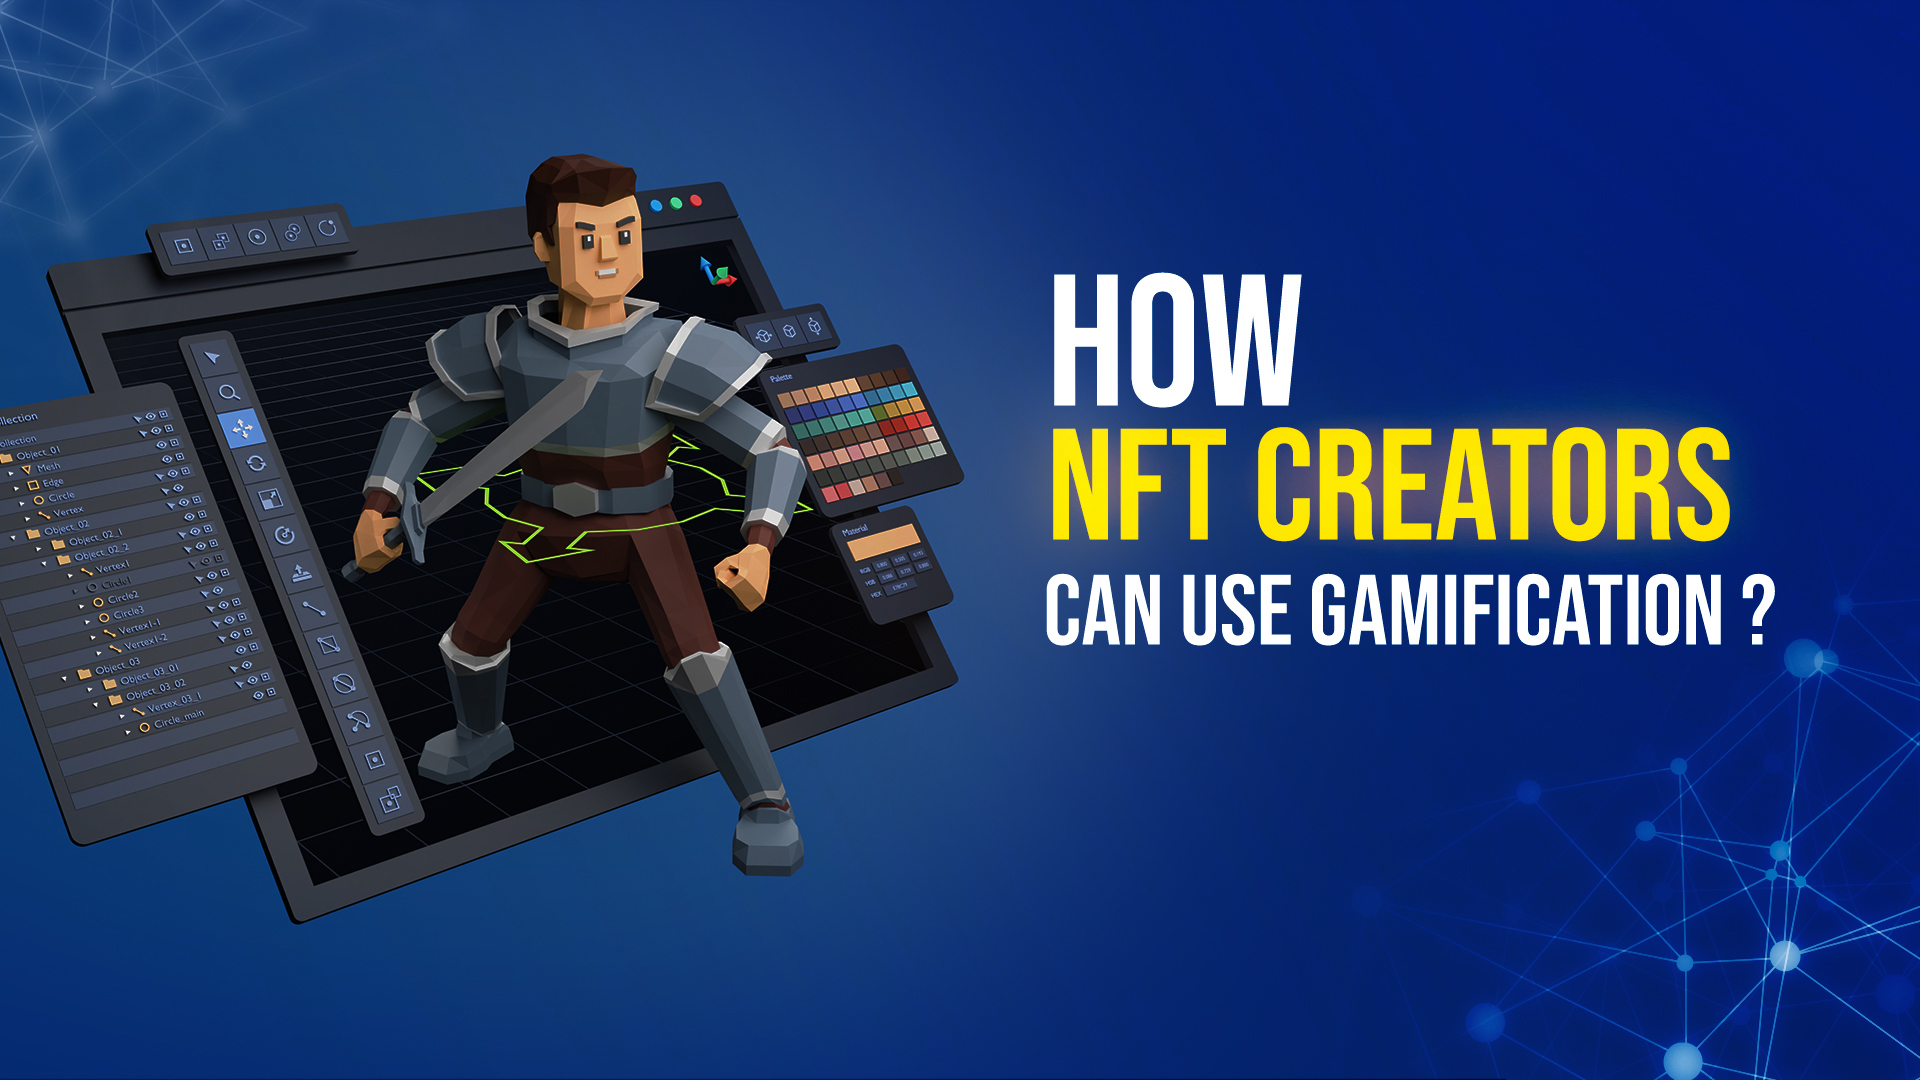 How NFT Creators Can Use Gamification?